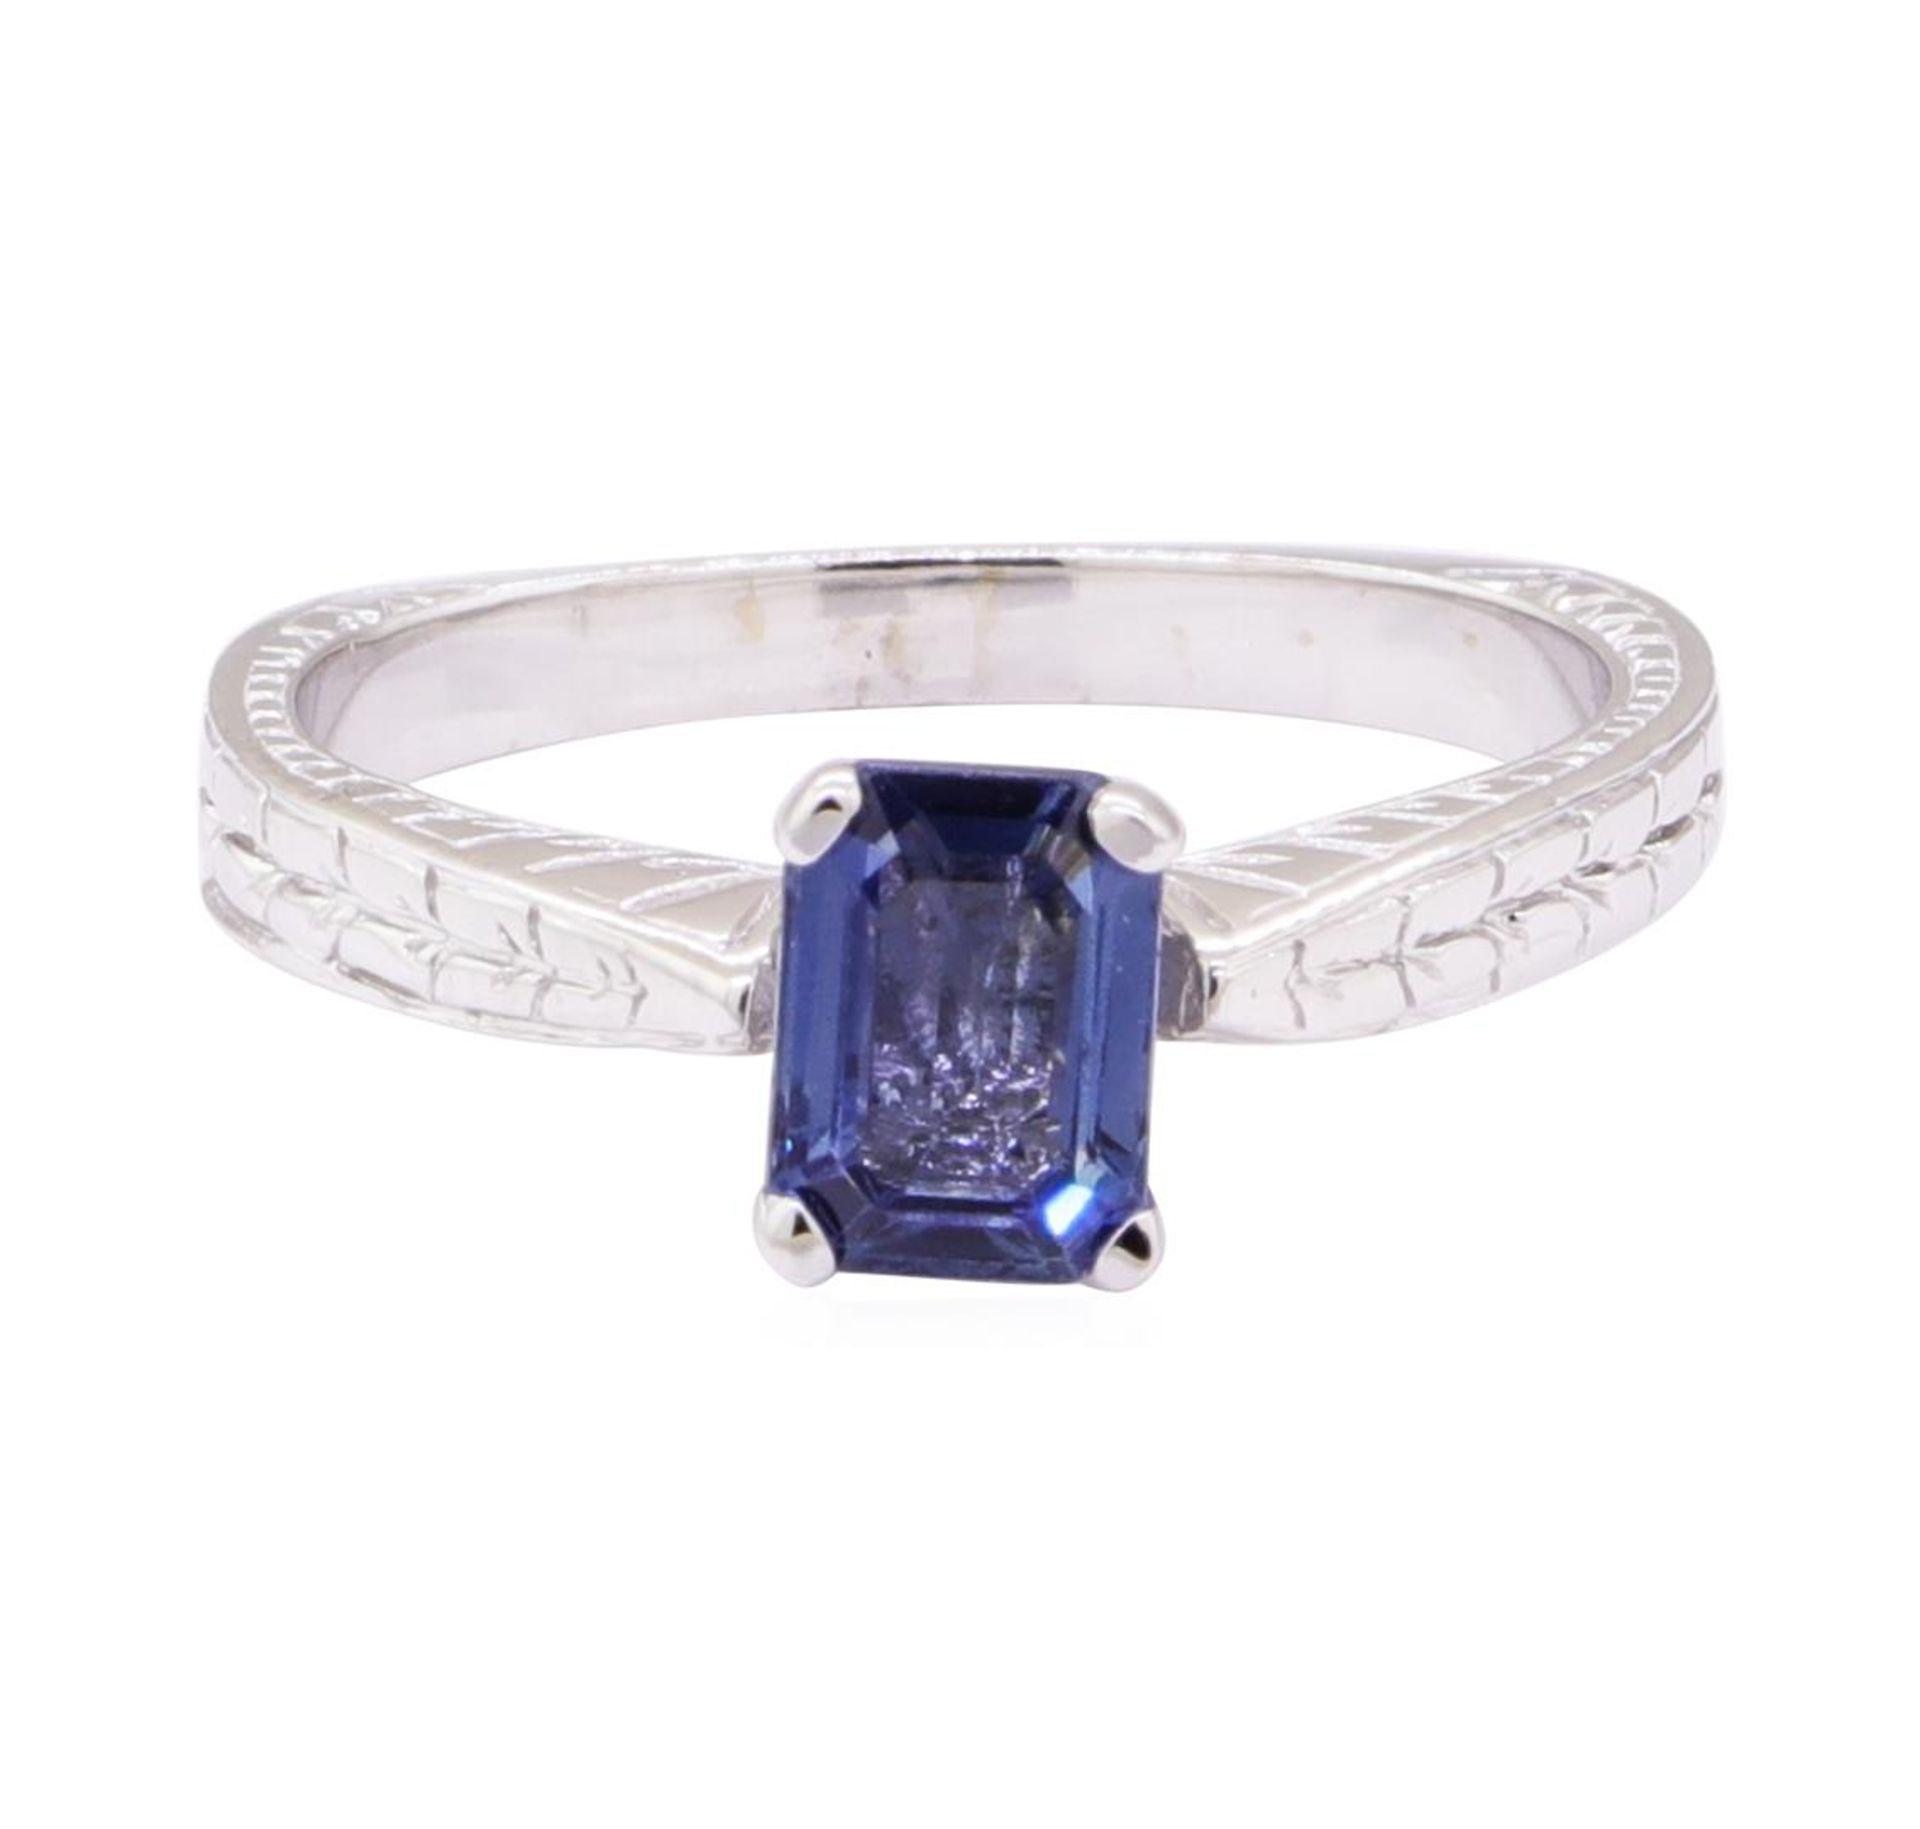 1.09ct Blue Sapphire Solitaire Ring - 14KT White Gold - Image 2 of 4